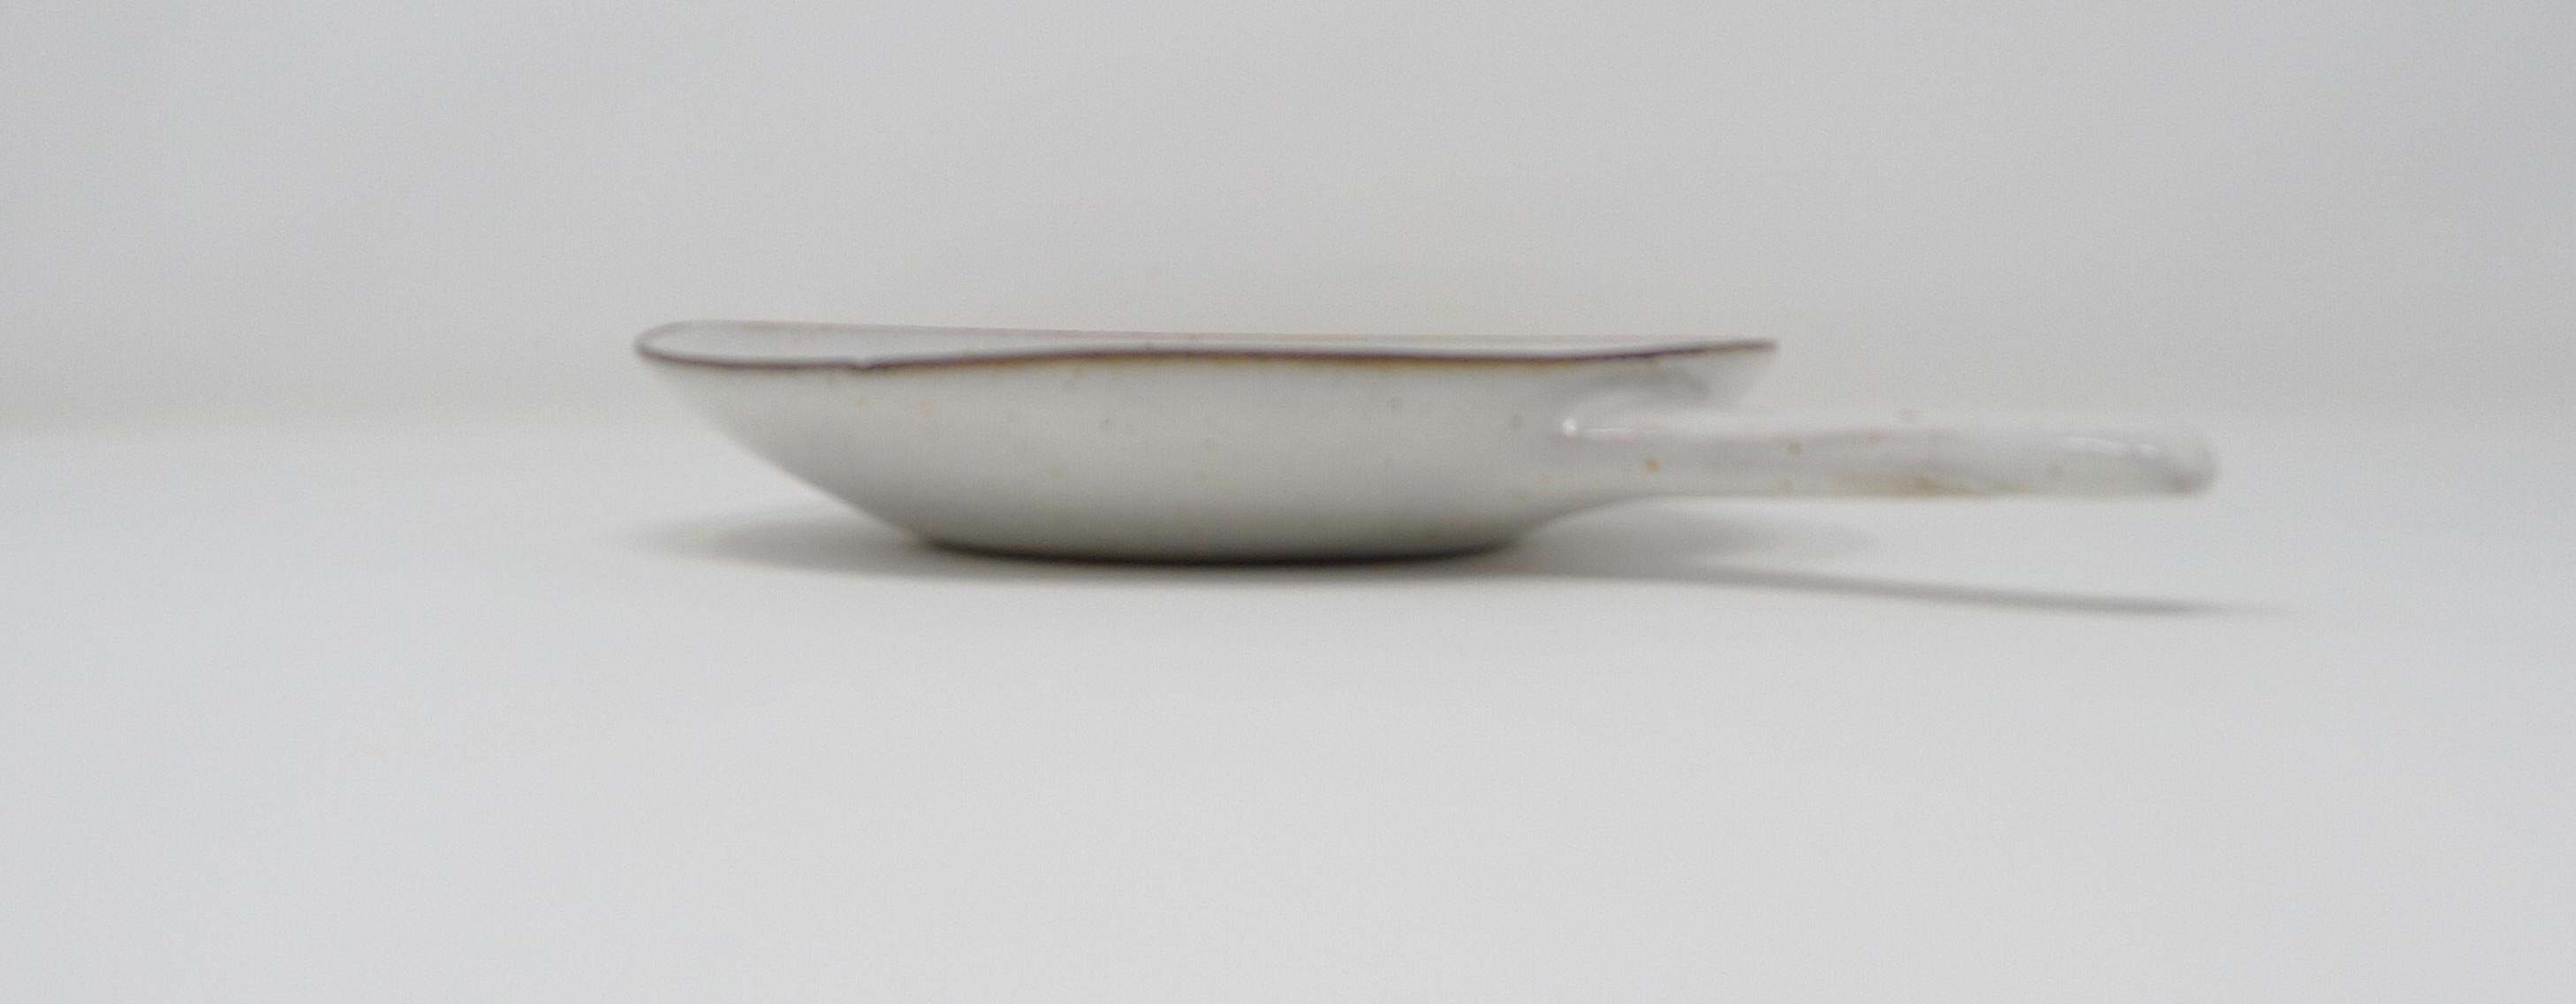 Lucie Rie; Elegant handled shallow stoneware dish in cream with manganese oxide lip, late 1950s.
Underside signed with impressed artists seal.